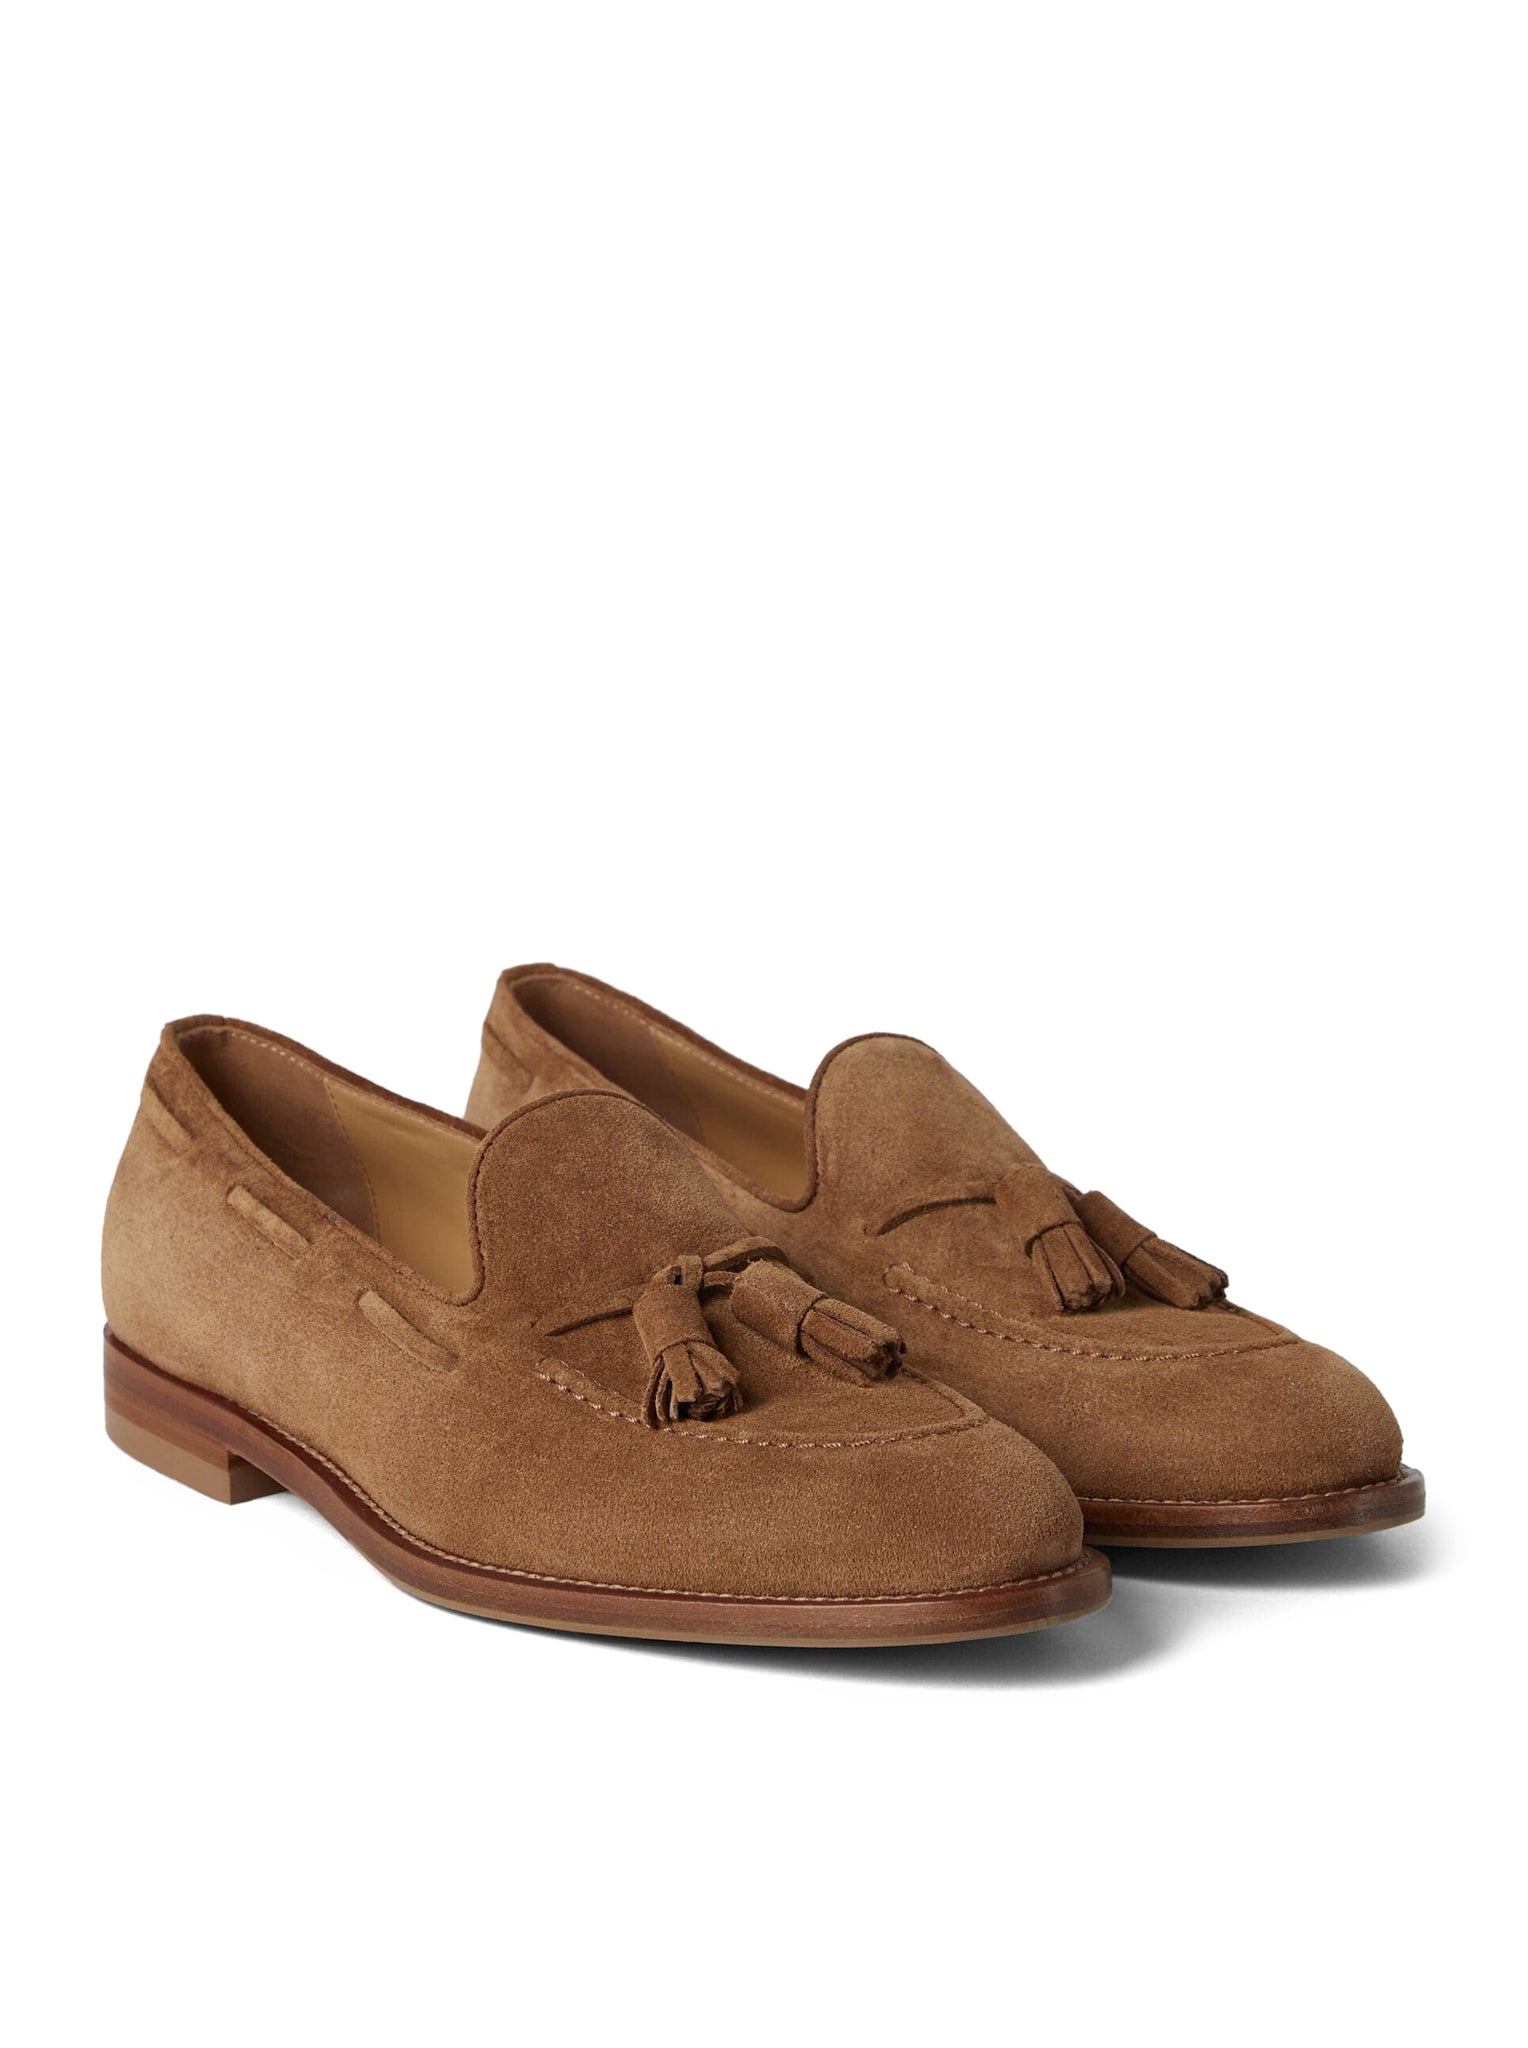 Loafers with tassel